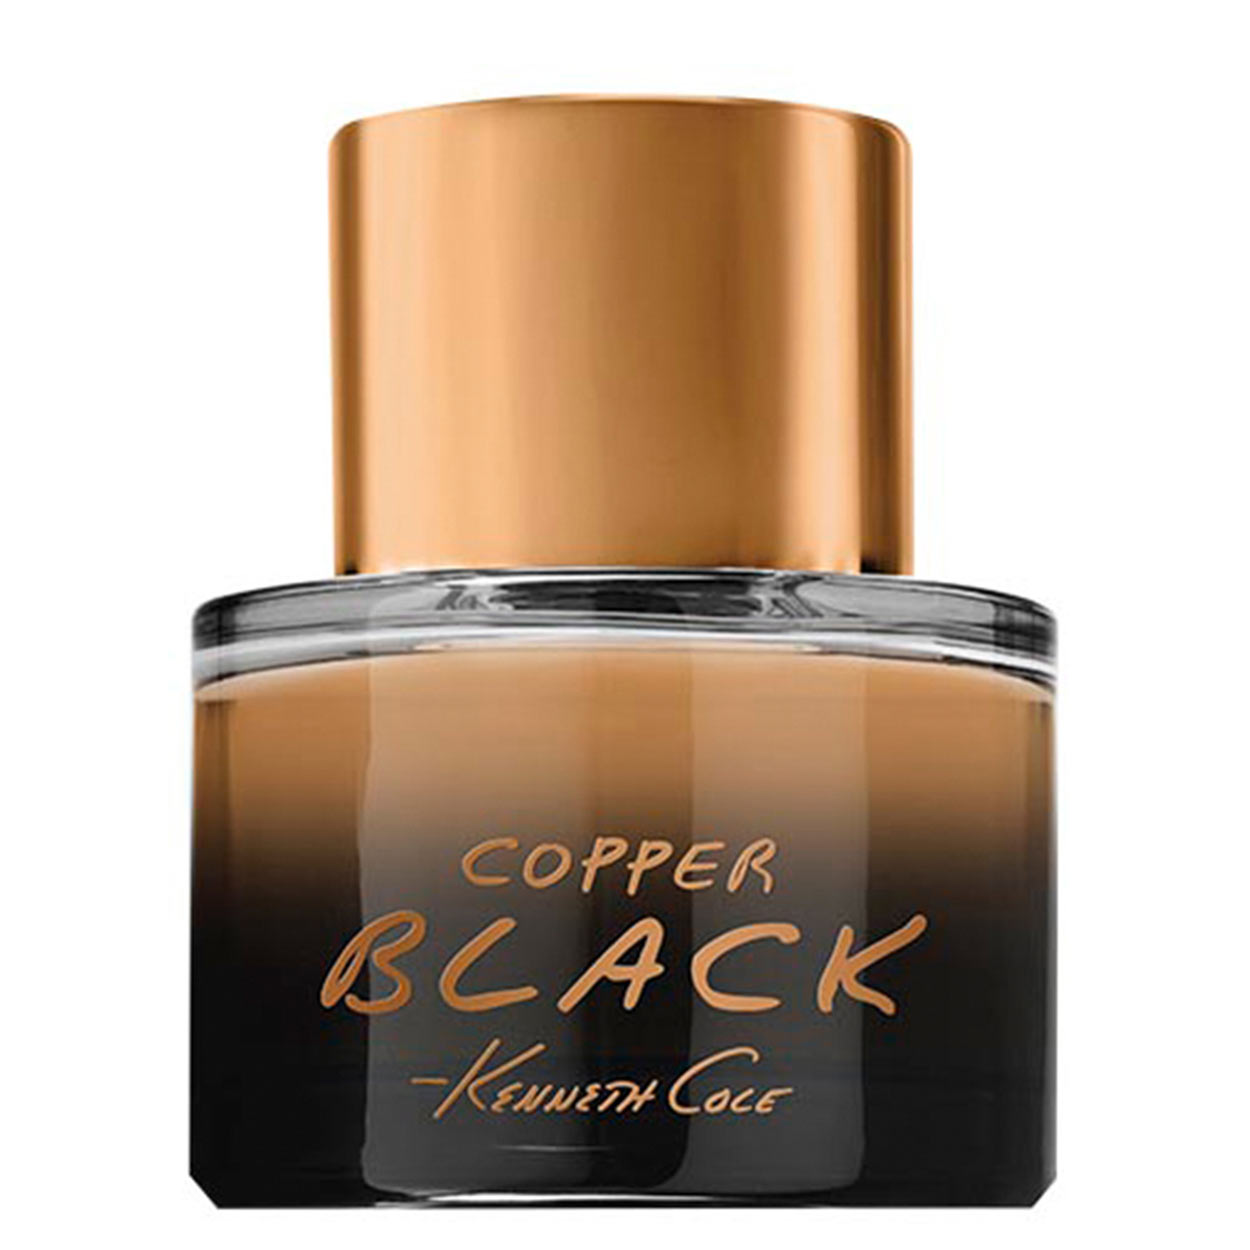 Copper-Black-Kenneth-Cole